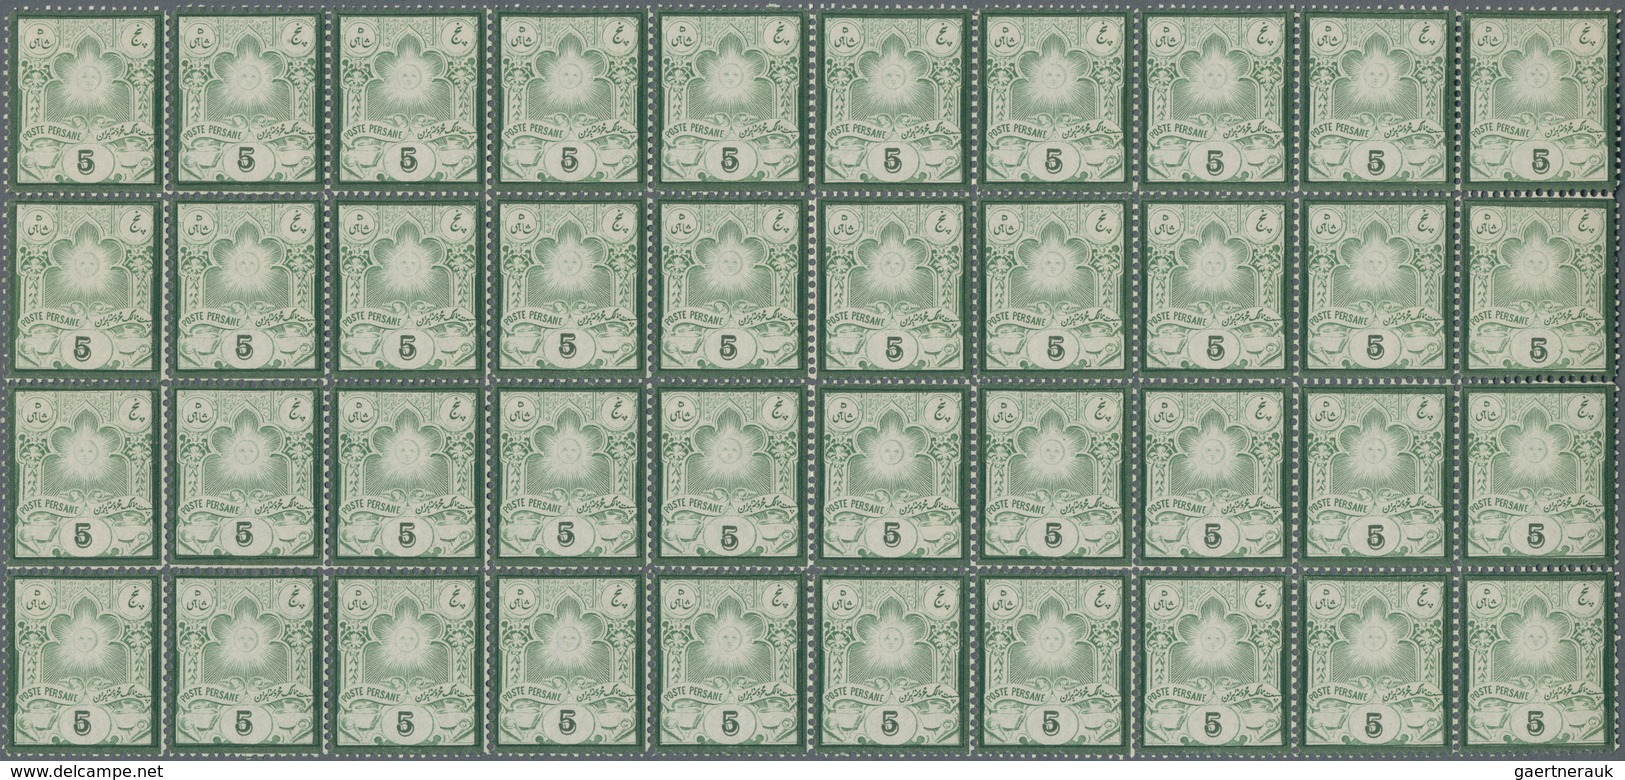 Iran: 1882, 5 Ch. Green Type I, 700 Stamps Mint Never Hinged In Large Blocks, A Very Scarce Offer An - Irán